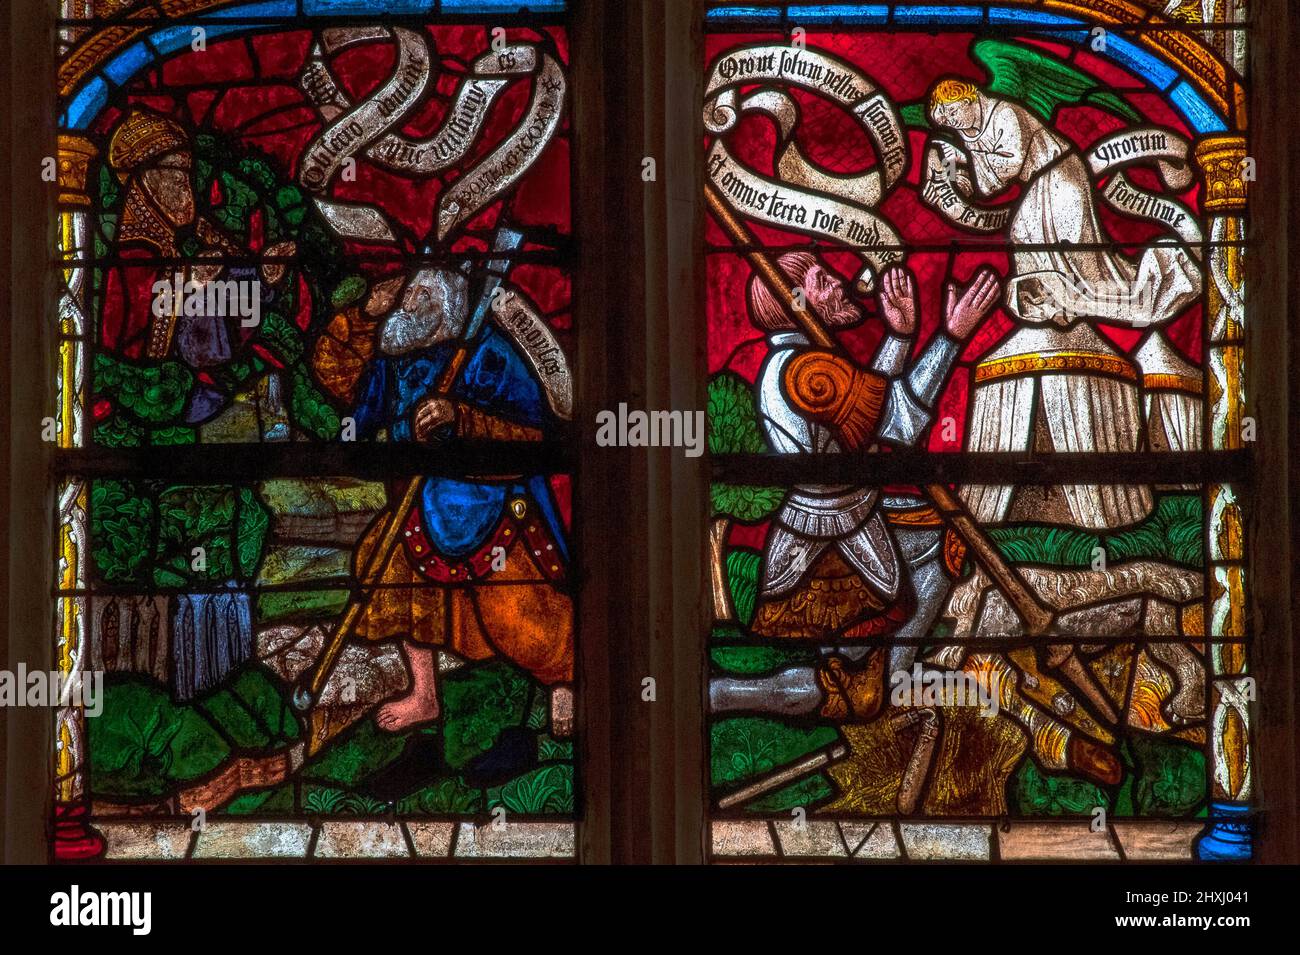 Moses and the Burning Bush and Gideon and the Fleece: two Hebrew Bible and Old Testament stories illustrated in glowing Troyenne stained glass in a Tree of Jesse window of 1512 in the village church at Ceffonds, in the Champagne region of northwest France. Stock Photo